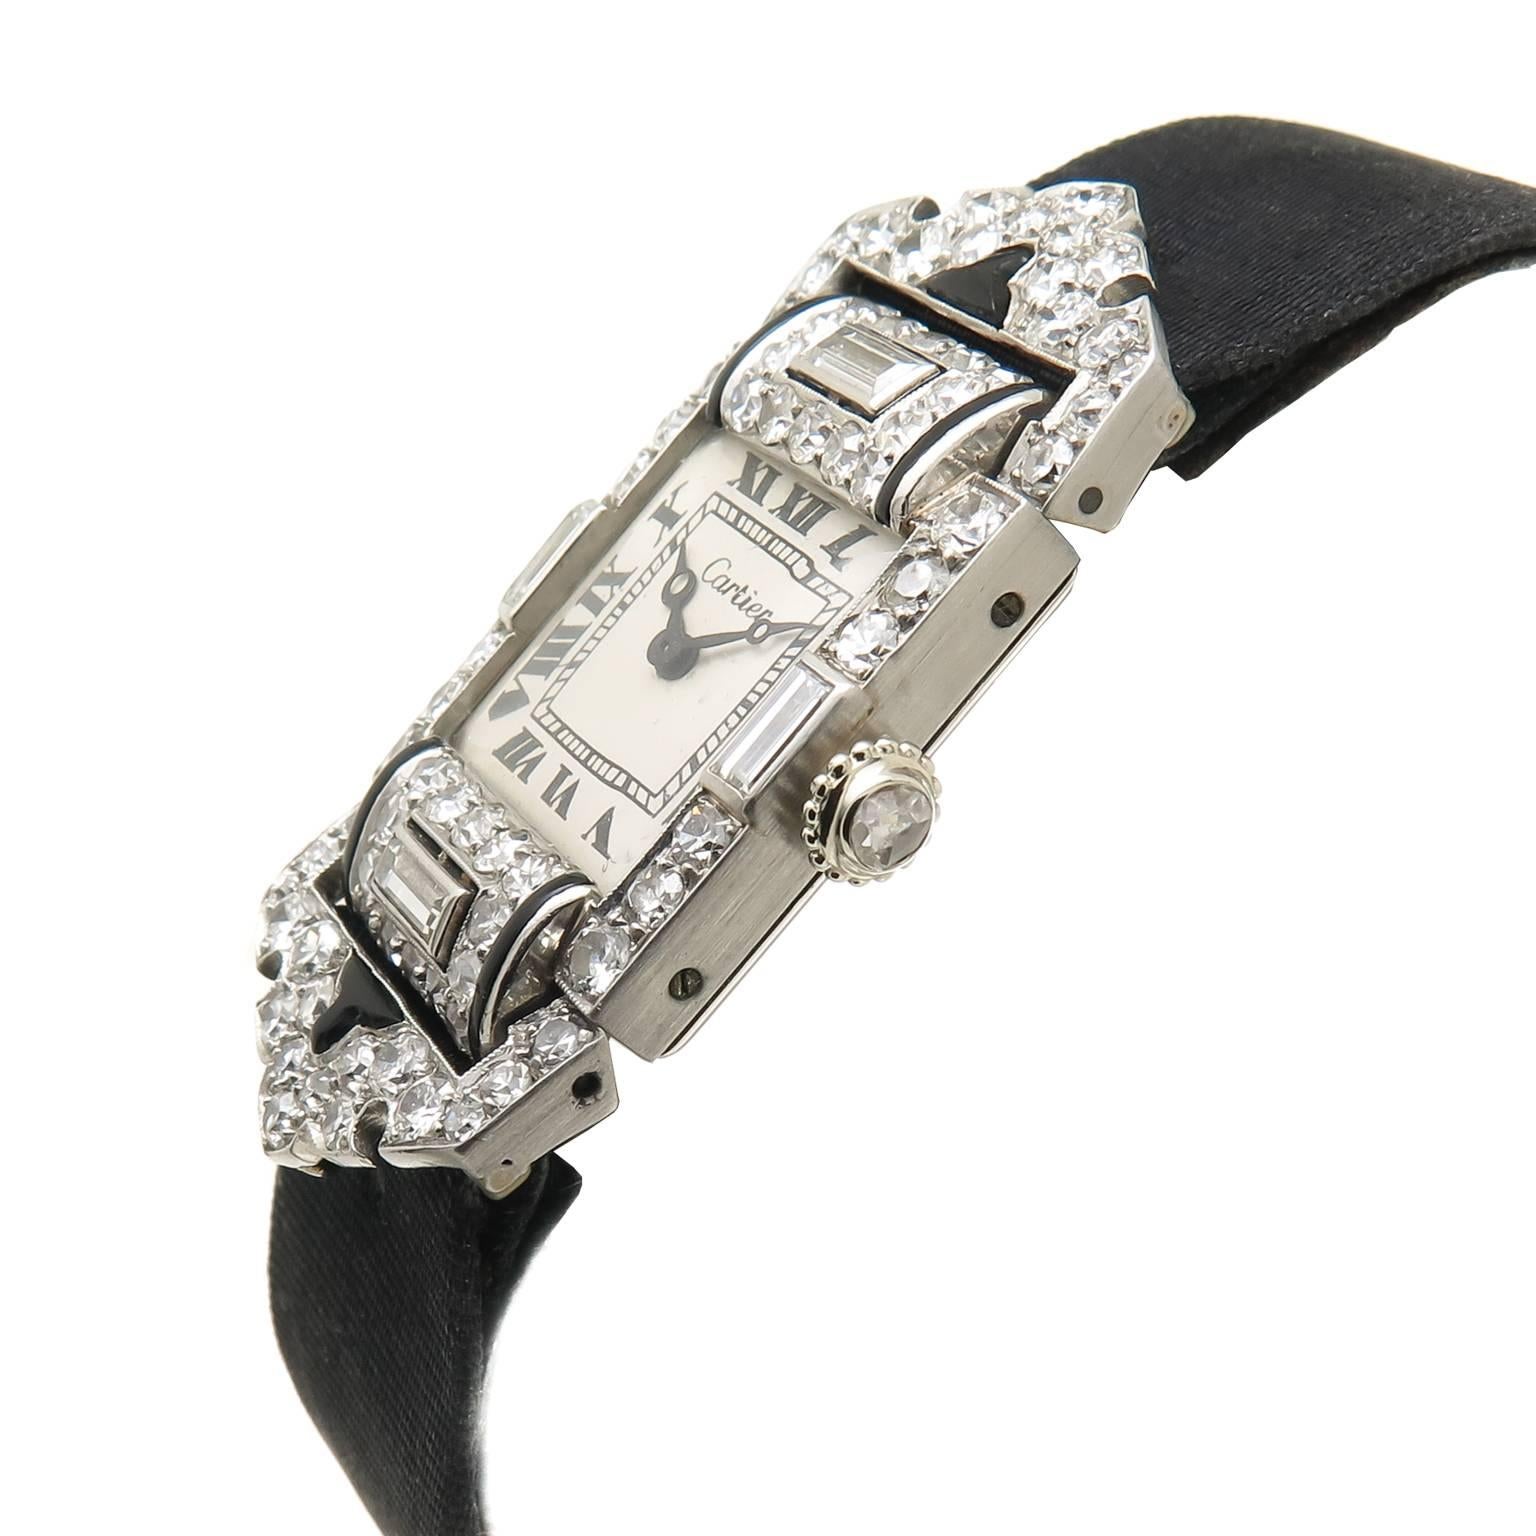 1920s Cartier Platinum, Diamond and Onyx Wrist Watch, measuring 1 5/8 inch in length and 3/4 inch wide, set with round and Baguette Diamonds totaling approximately 2 carats and a Diamond Set Crown. Mechanical, manual wind EWCC, European Watch &